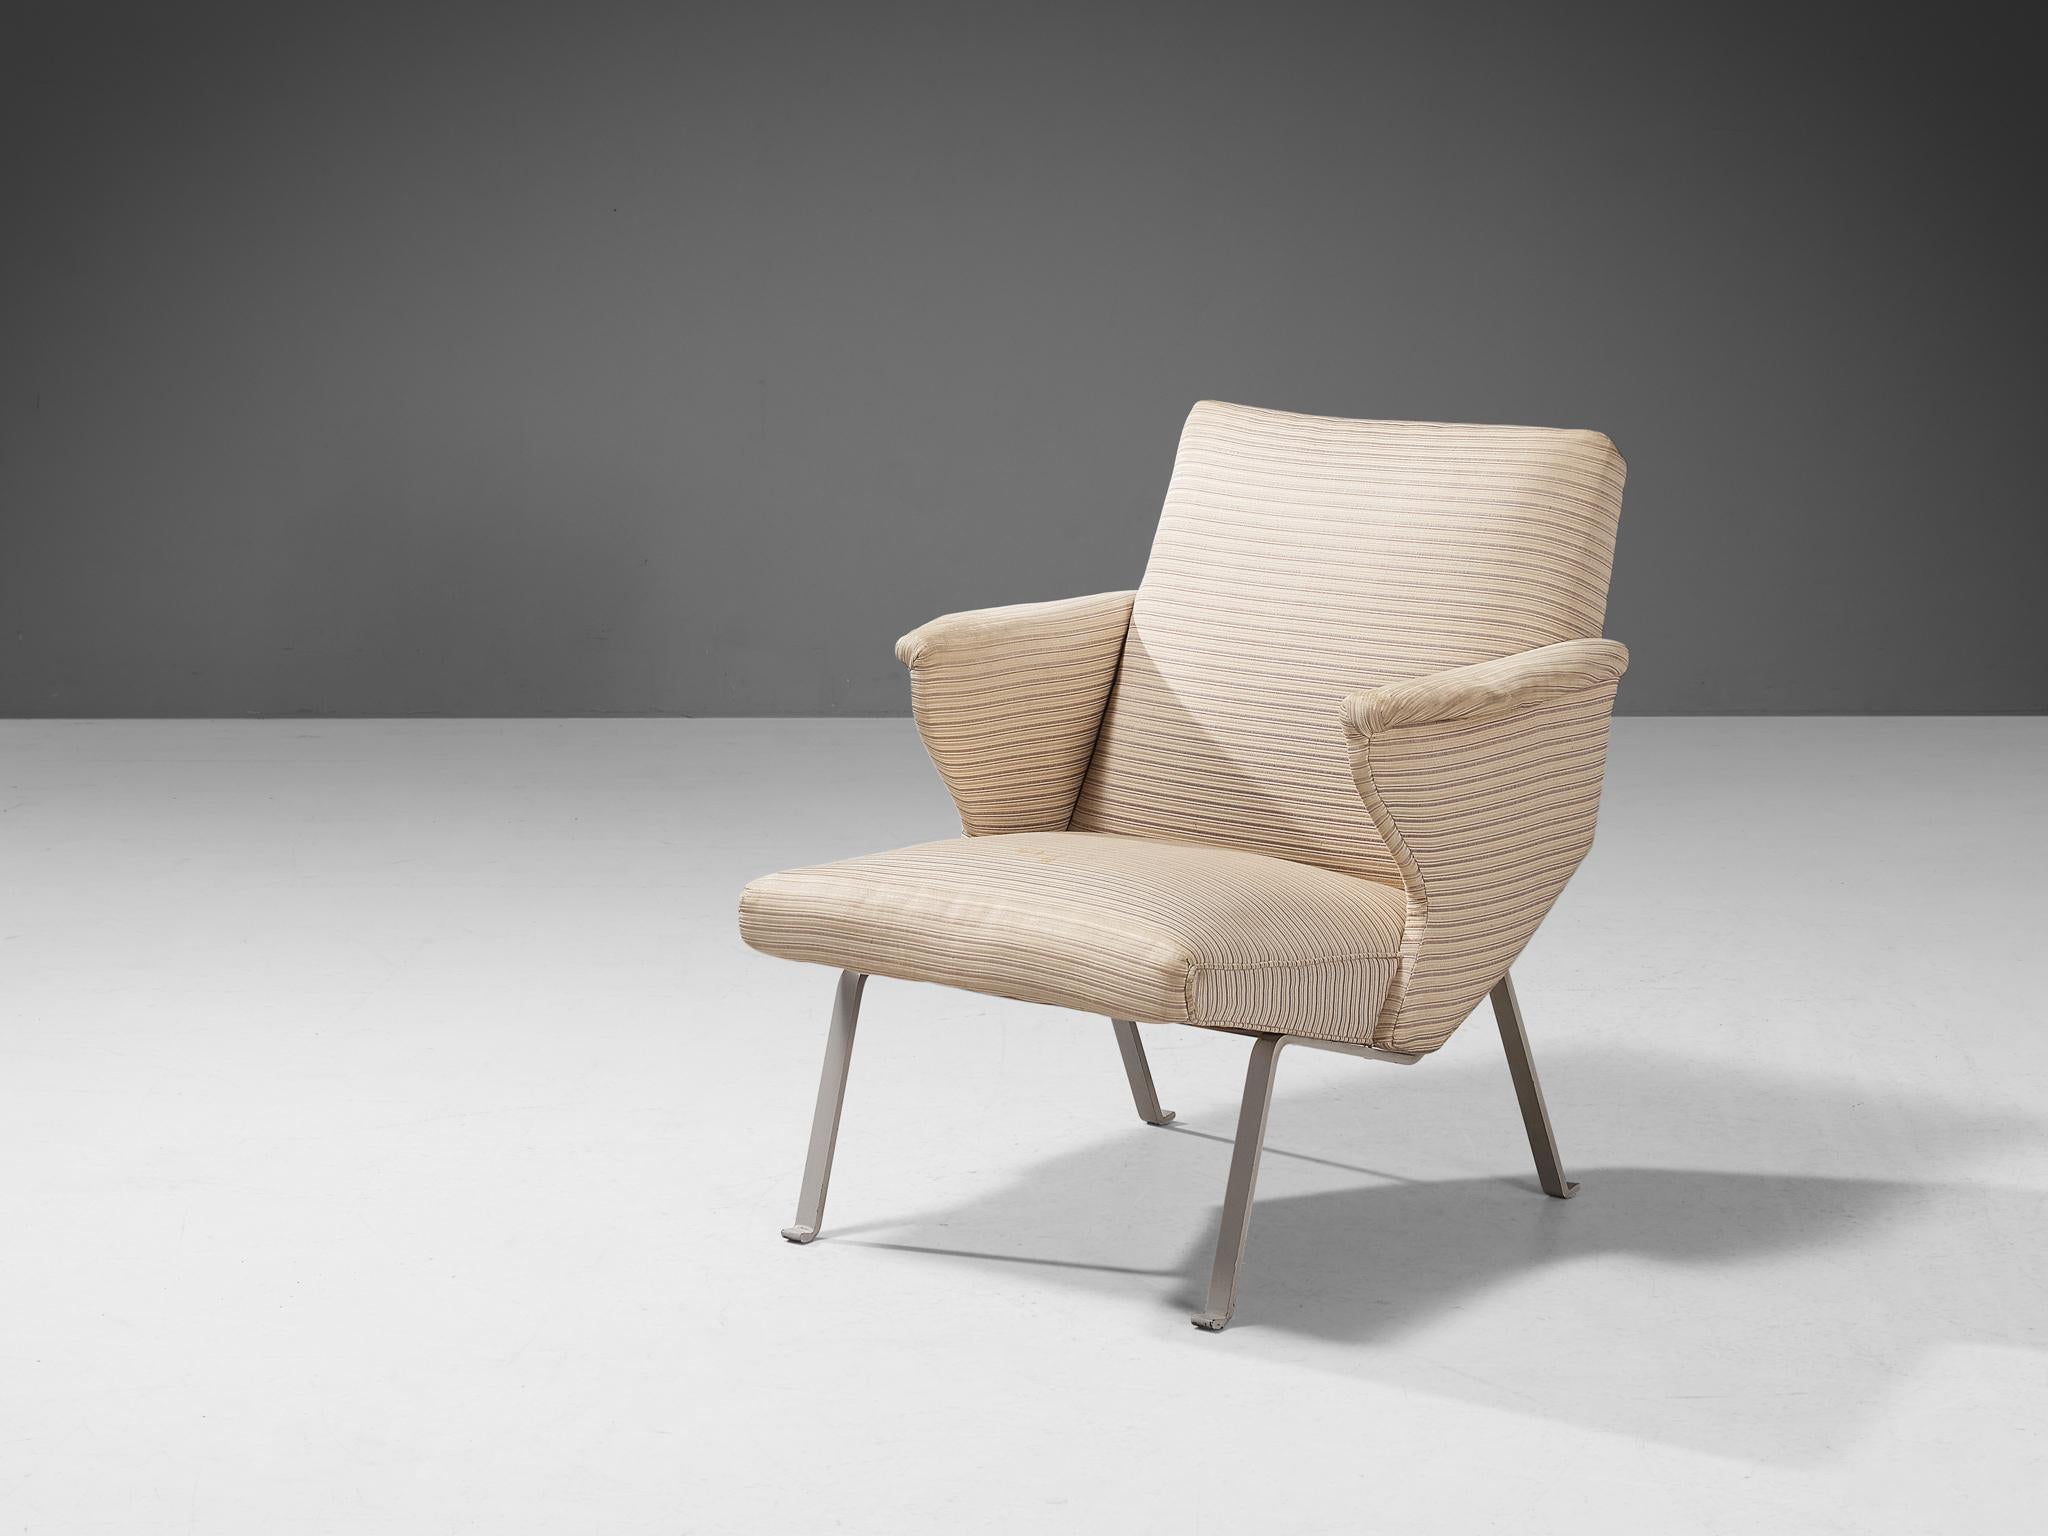 Lounge chair, fabric, lacquered steel, Europe, 1980s.

This elegant-shaped lounge chair has a solid construction featuring geometrical shapes and sharp edges, giving the lounge chair character. The white lacquered steel legs elevate the seat up in a